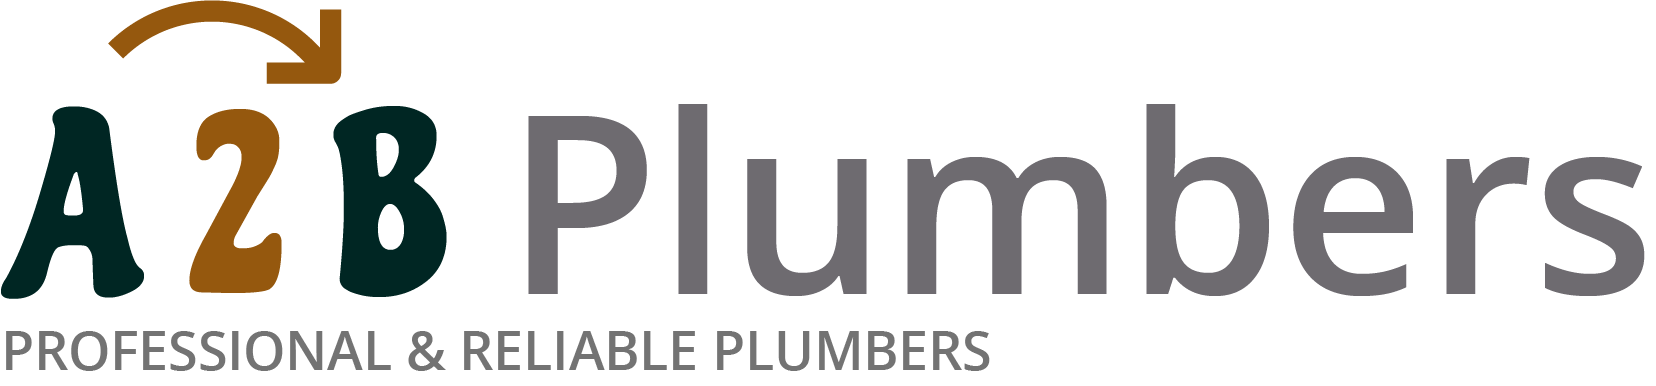 If you need a boiler installed, a radiator repaired or a leaking tap fixed, call us now - we provide services for properties in Burnt Oak and the local area.